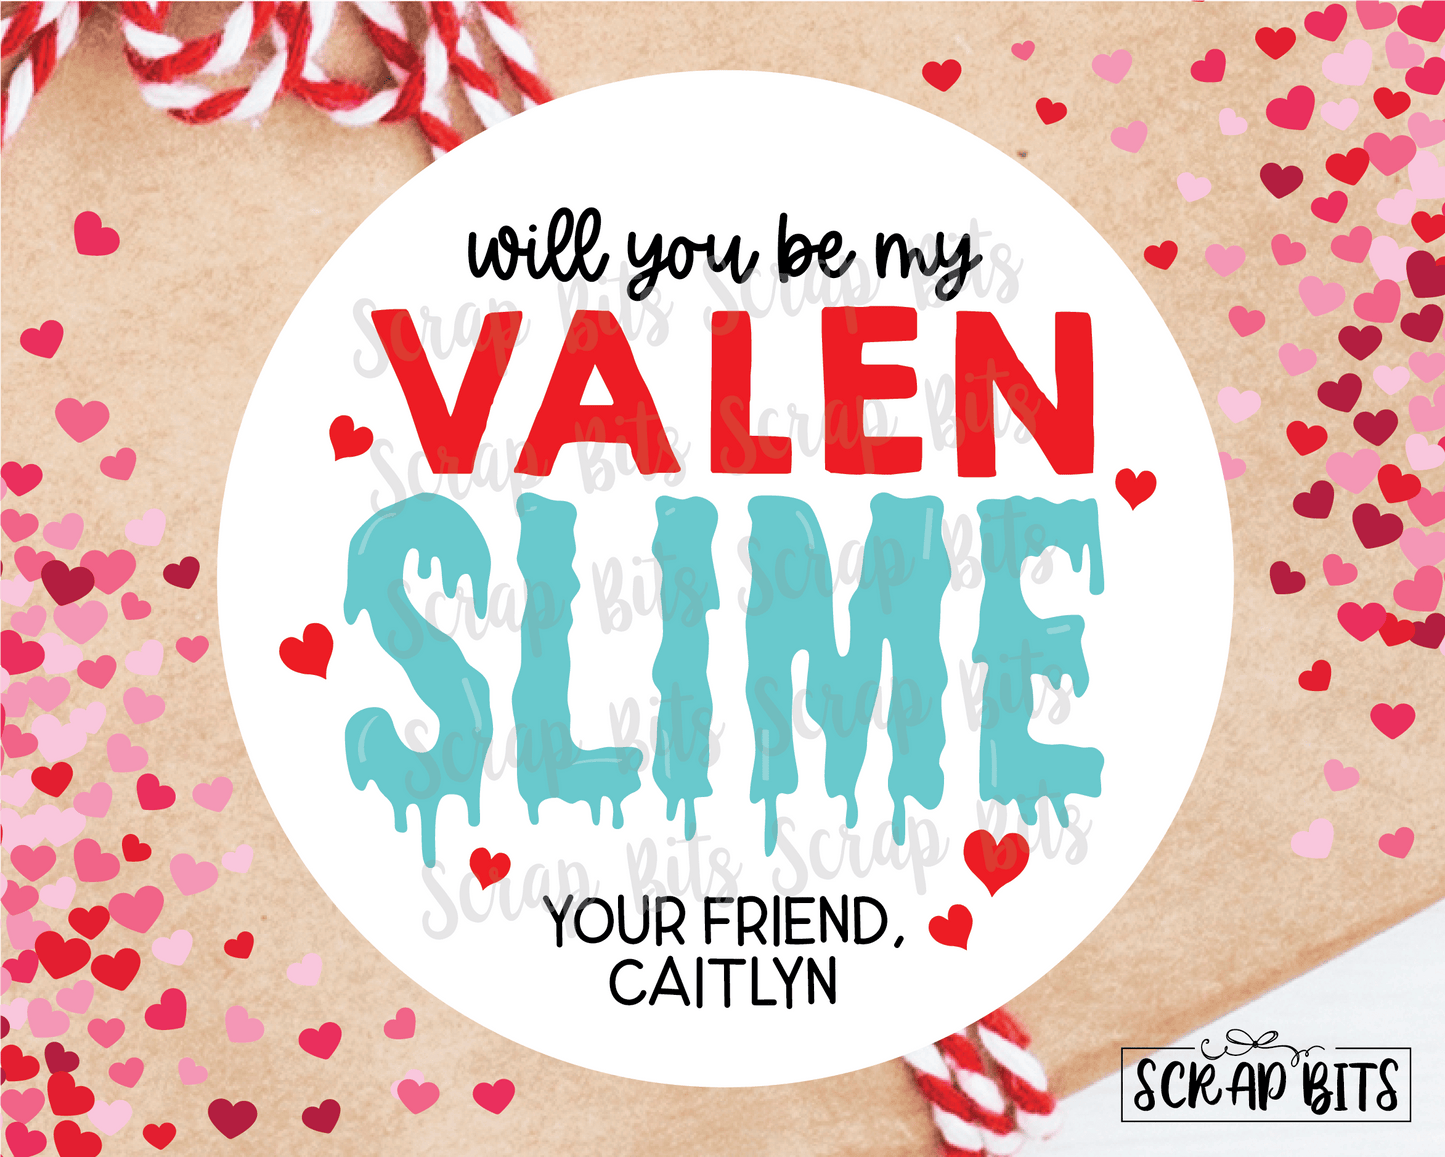 Will You Be My ValenSlime, Valentine Slime Stickers or Tags, Red & Blue - Scrap Bits